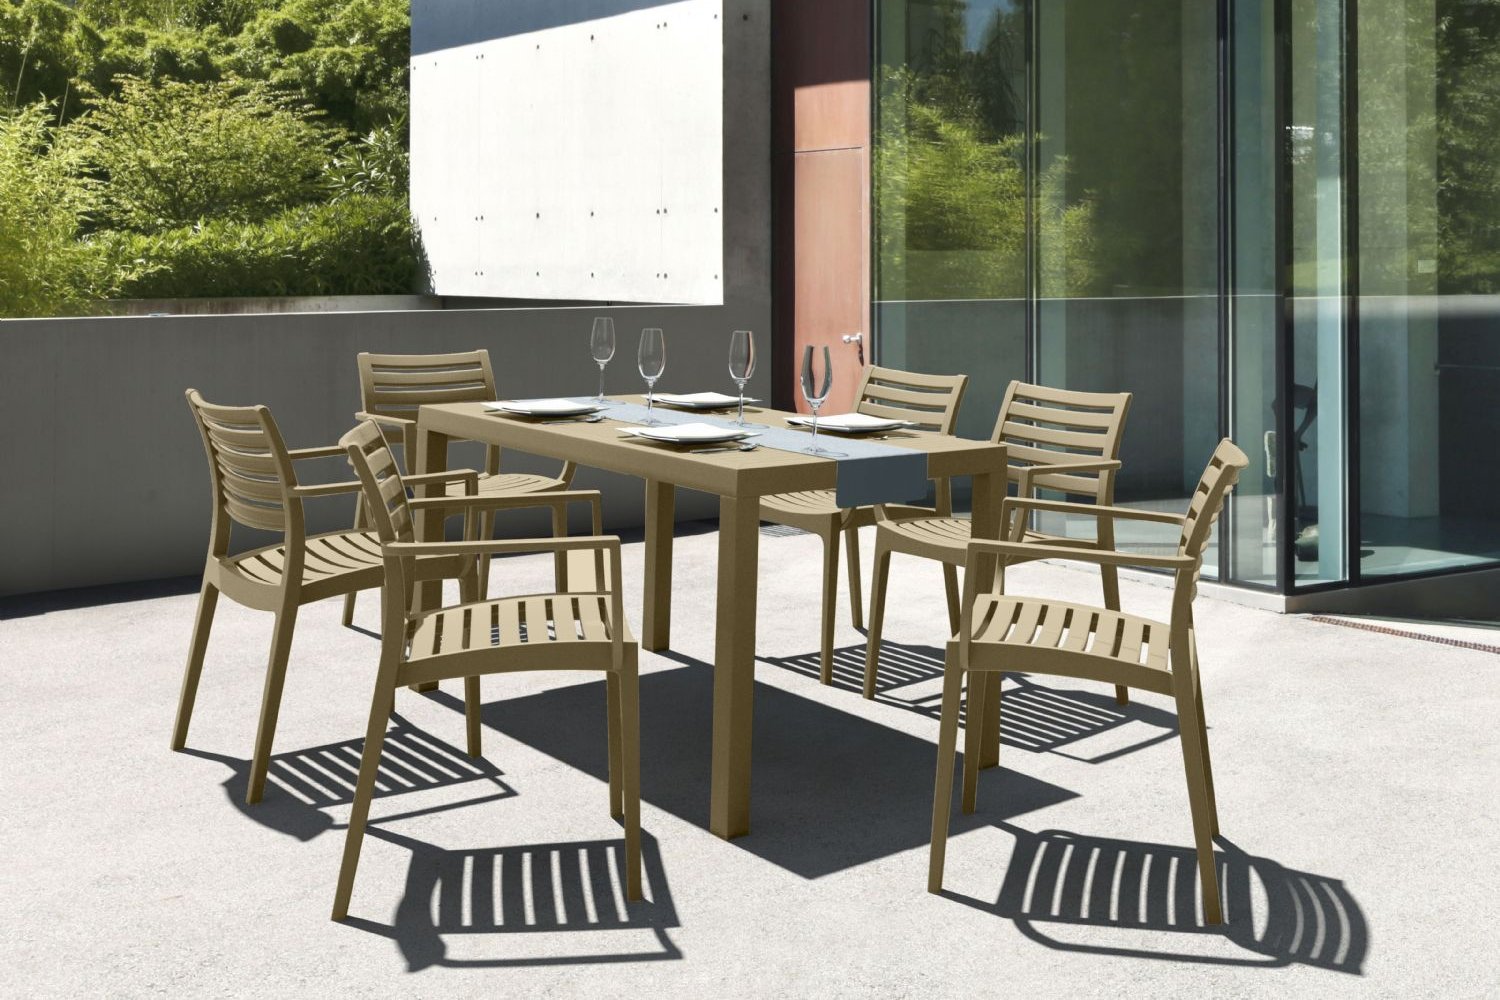 Artemis Resin Rectangle Outdoor Dining Set 7 Piece with Arm Chairs Cafe Latte ISP1862S-TEA - 6